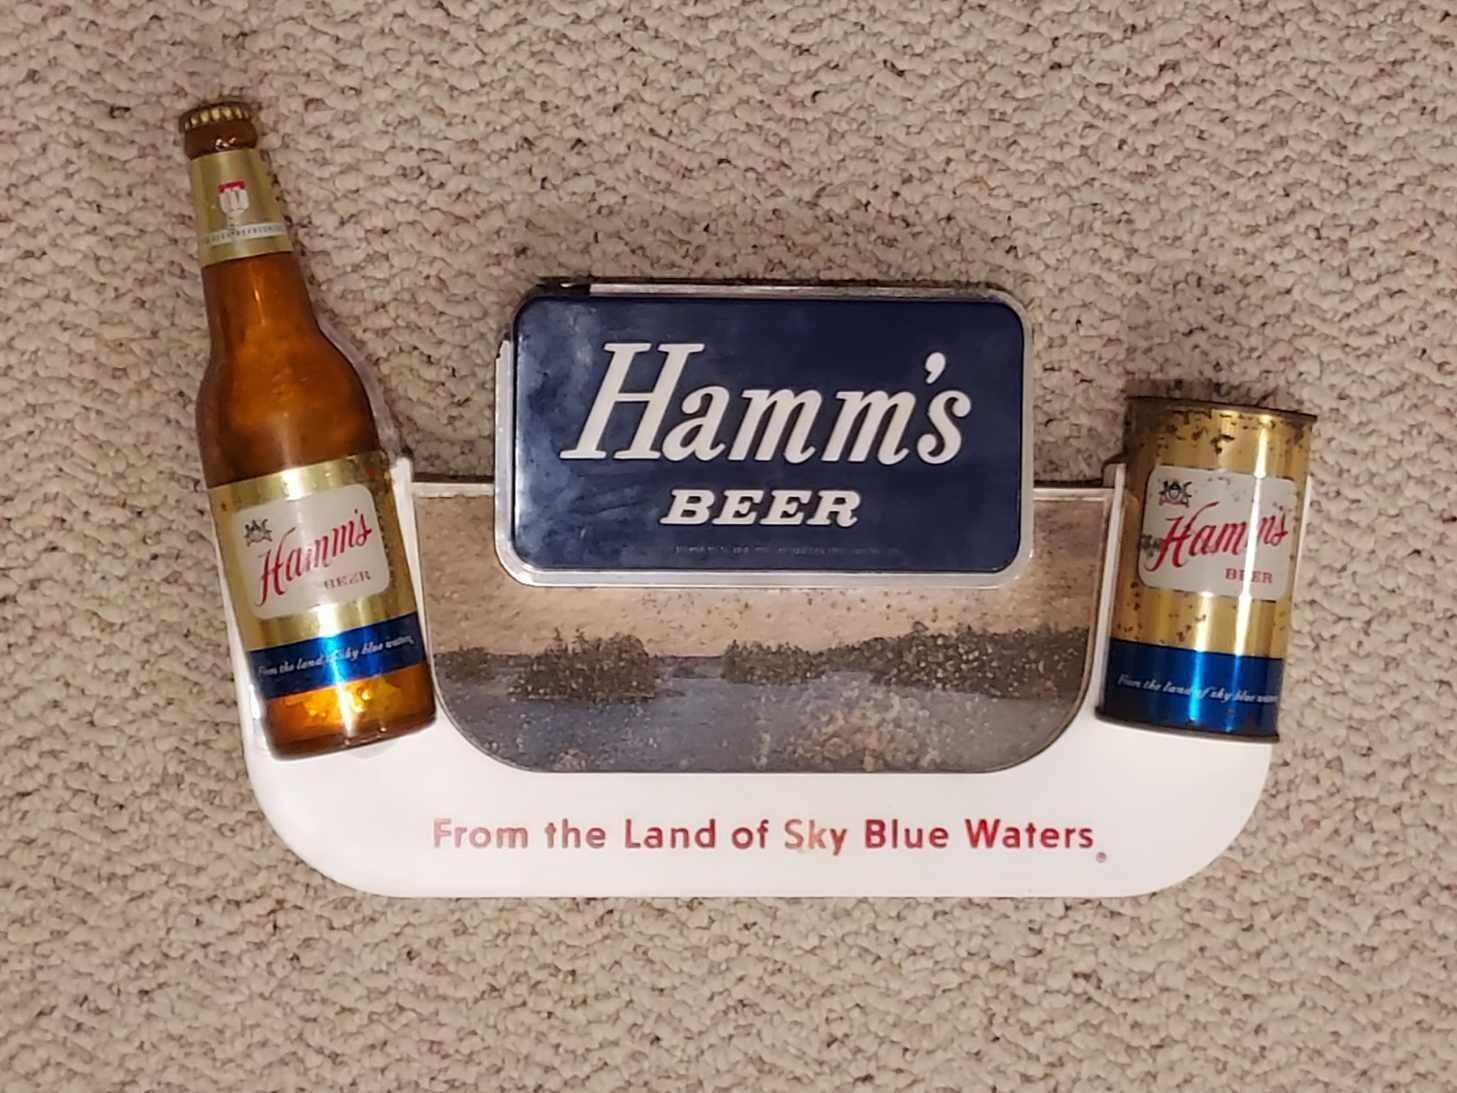 RARE 1950s HAMM\'S BEER three-dimensional display sign from MINNESOTA - AWESOME